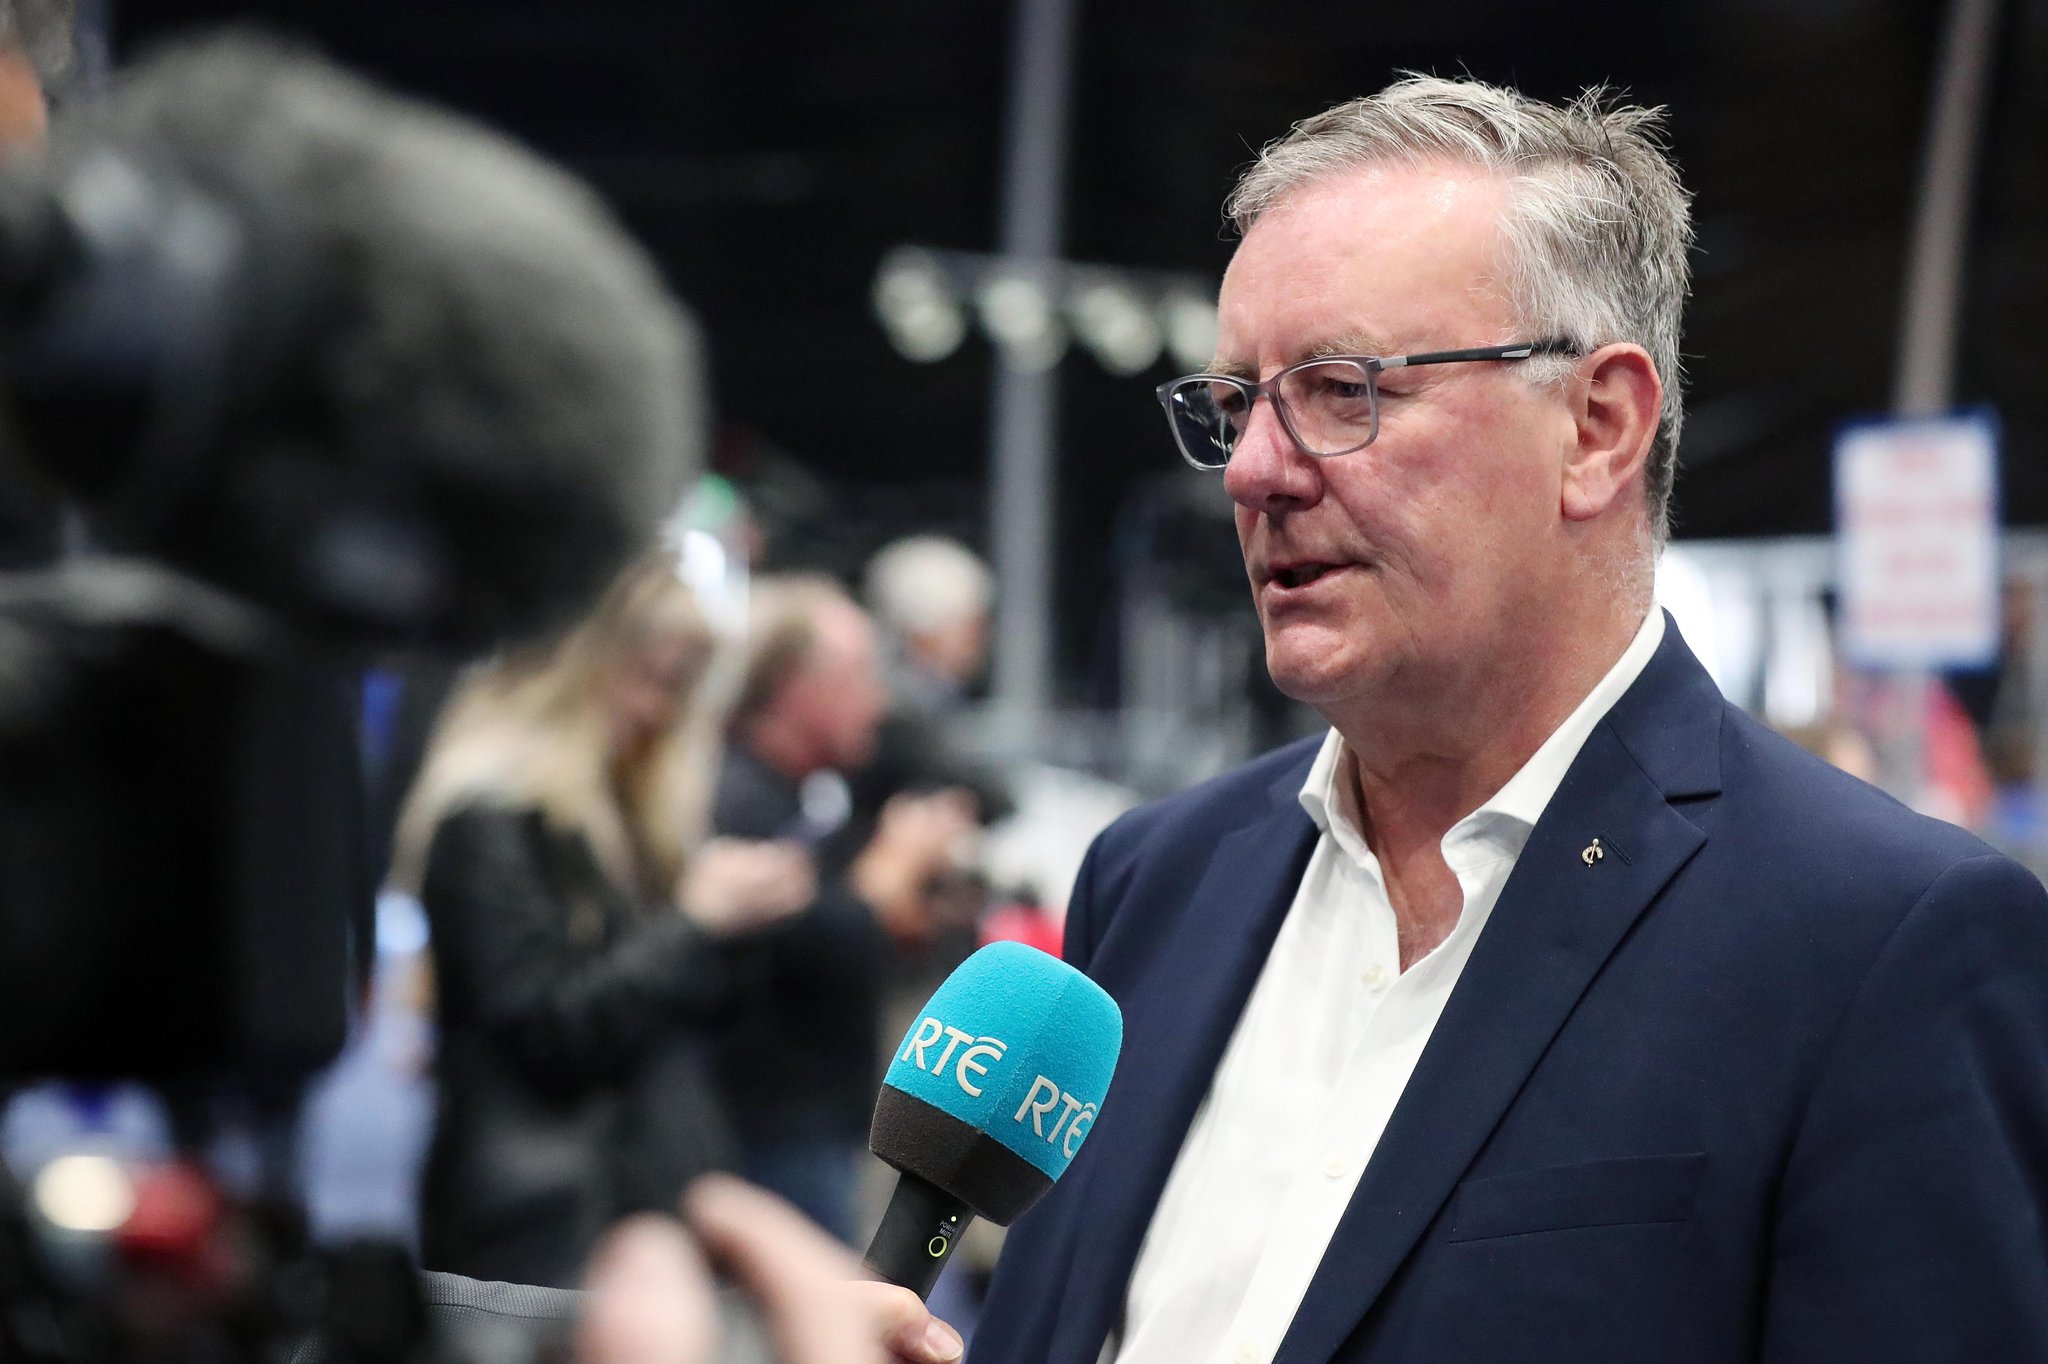 ELECTION 2022: Ex-UUP chief Mike Nesbitt calls for party to be patient with Doug Beattie's leadership